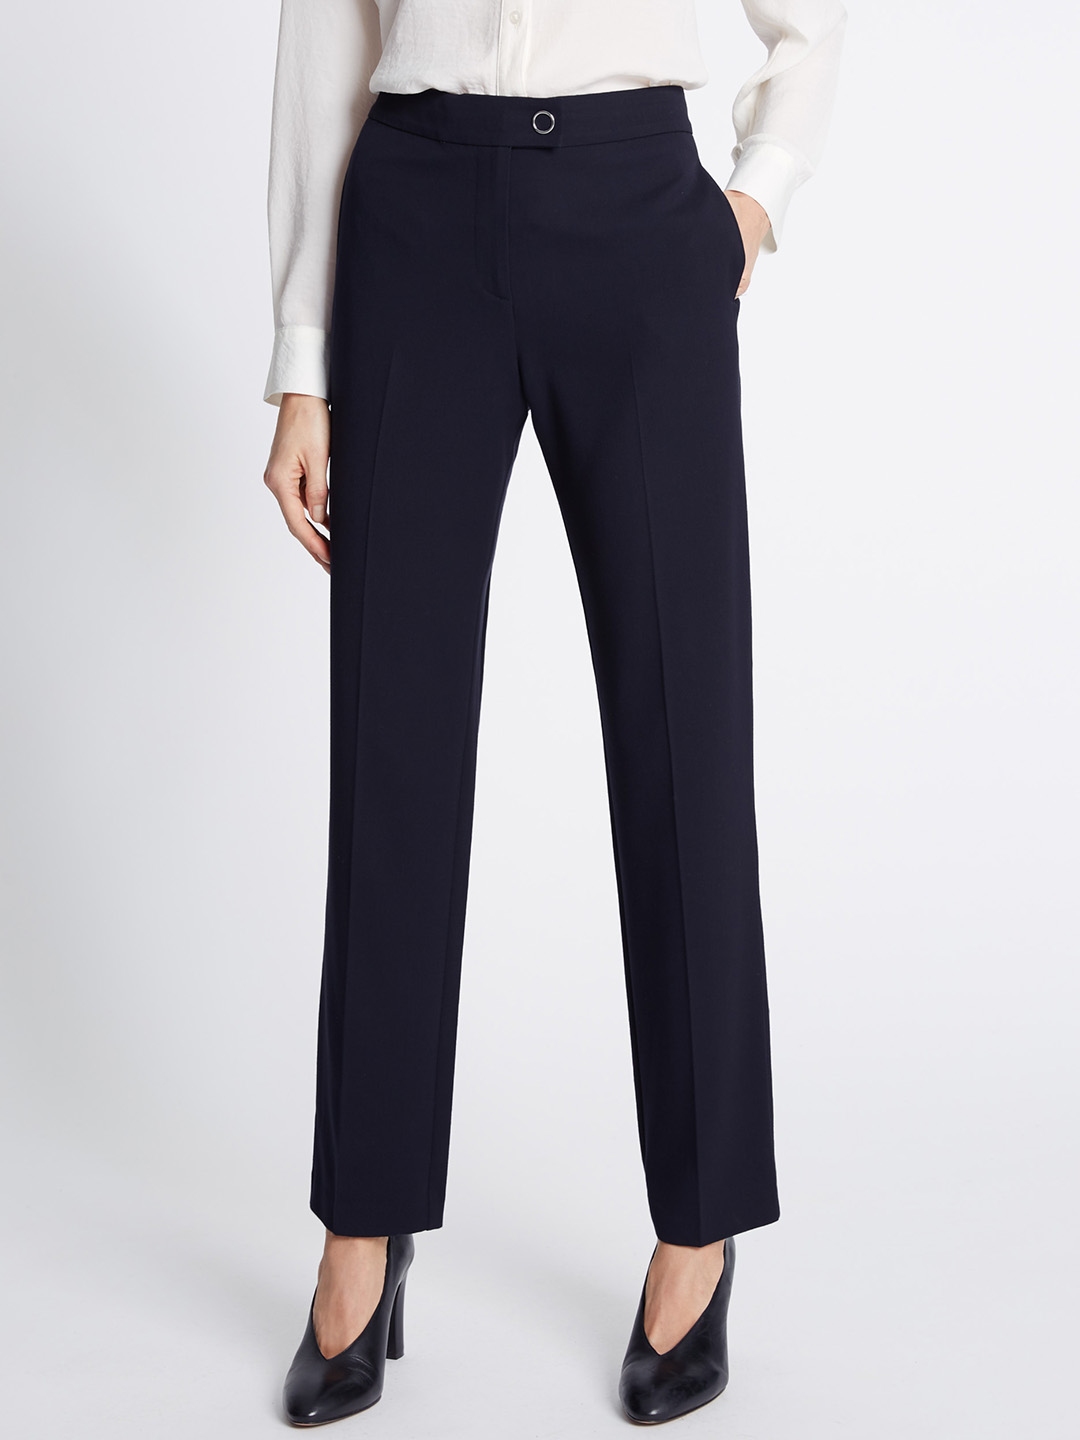 Tailored Fit Pants In Navy Blue